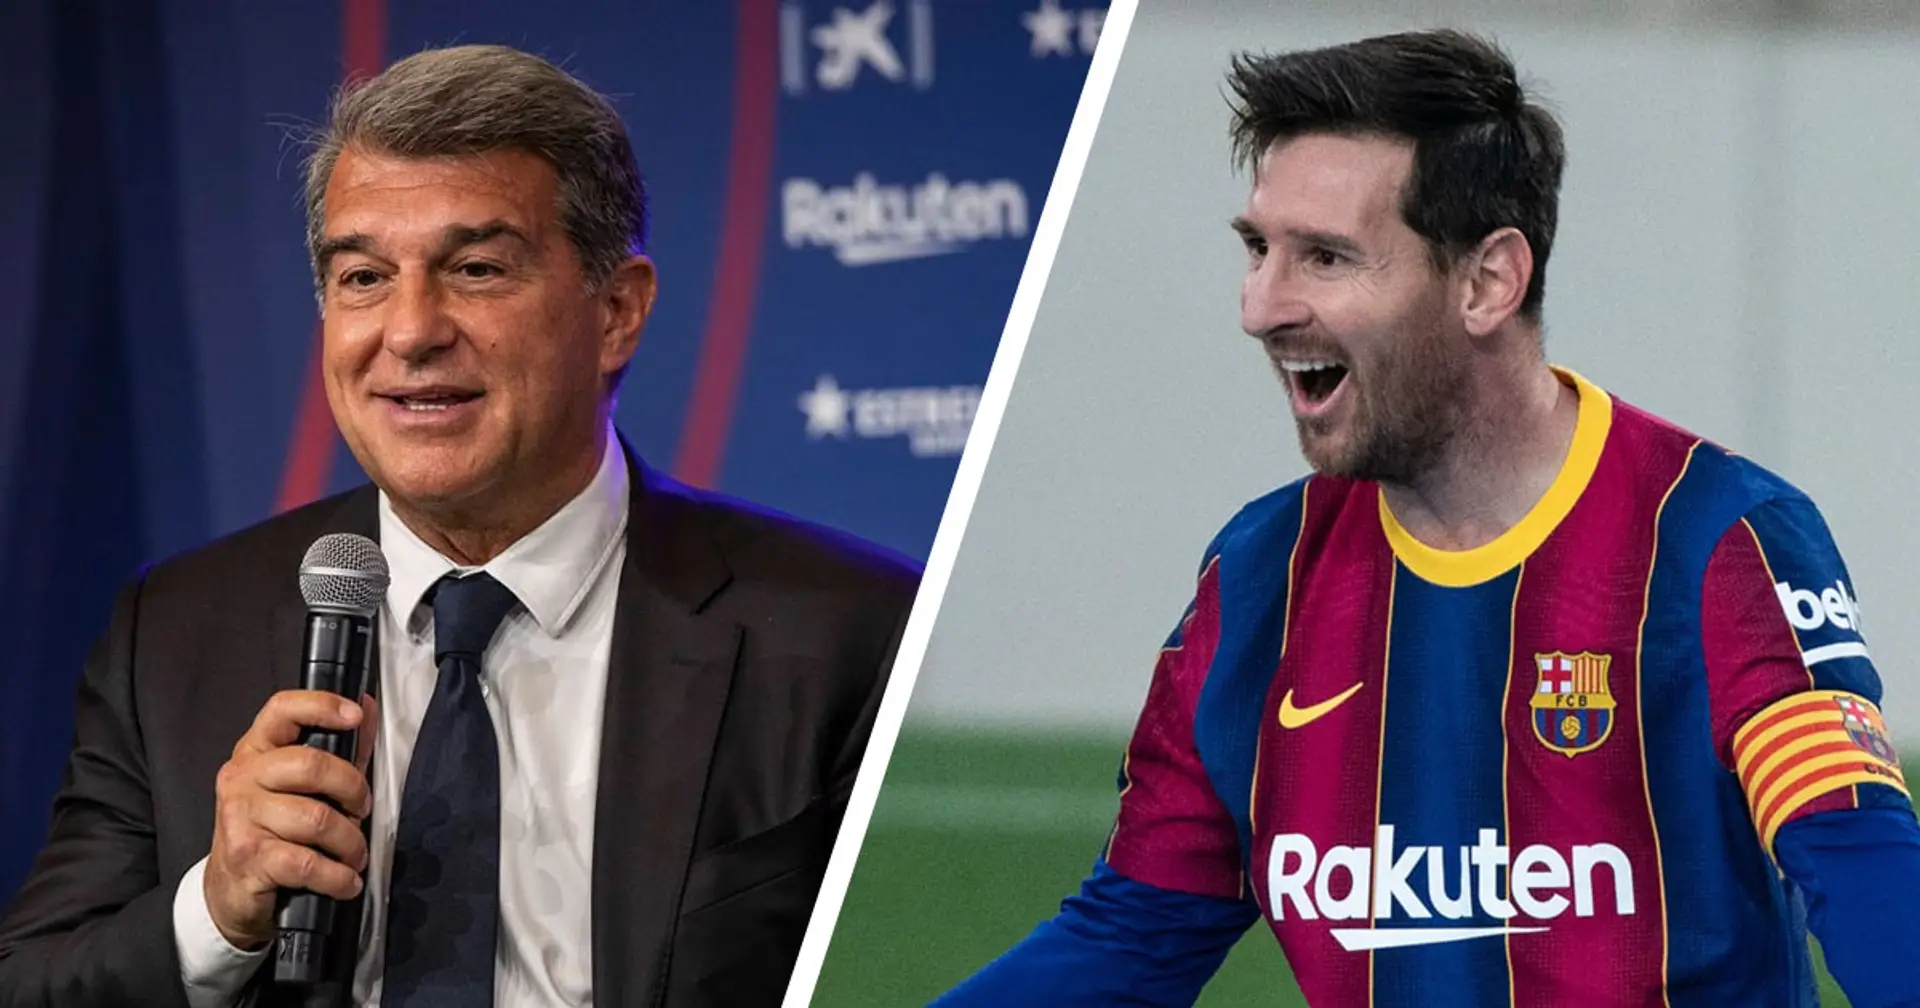 Messi and Barca reach final agreement over extension, announcement in coming days (reliability: 5 stars)